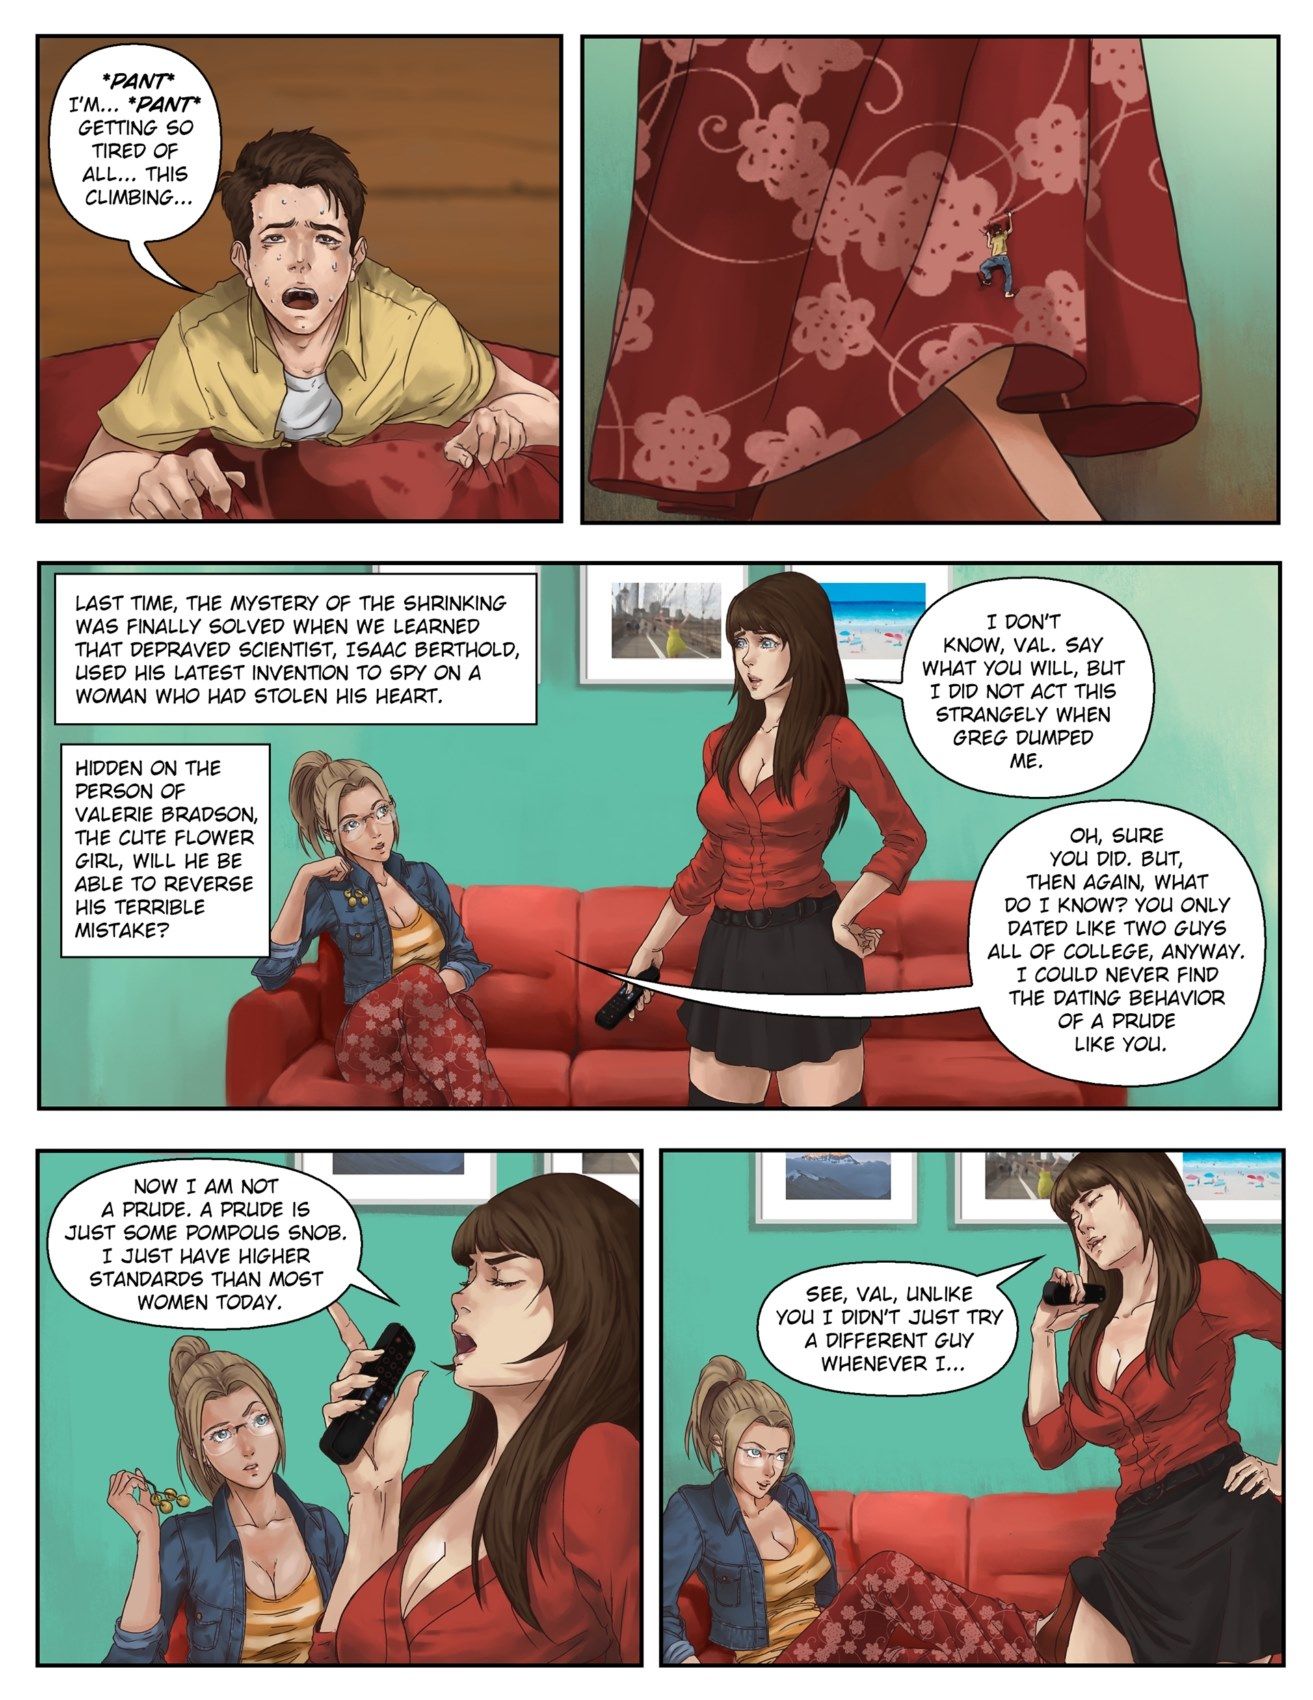 A Weekend Alone Issue 09 by GiantessFan page 3